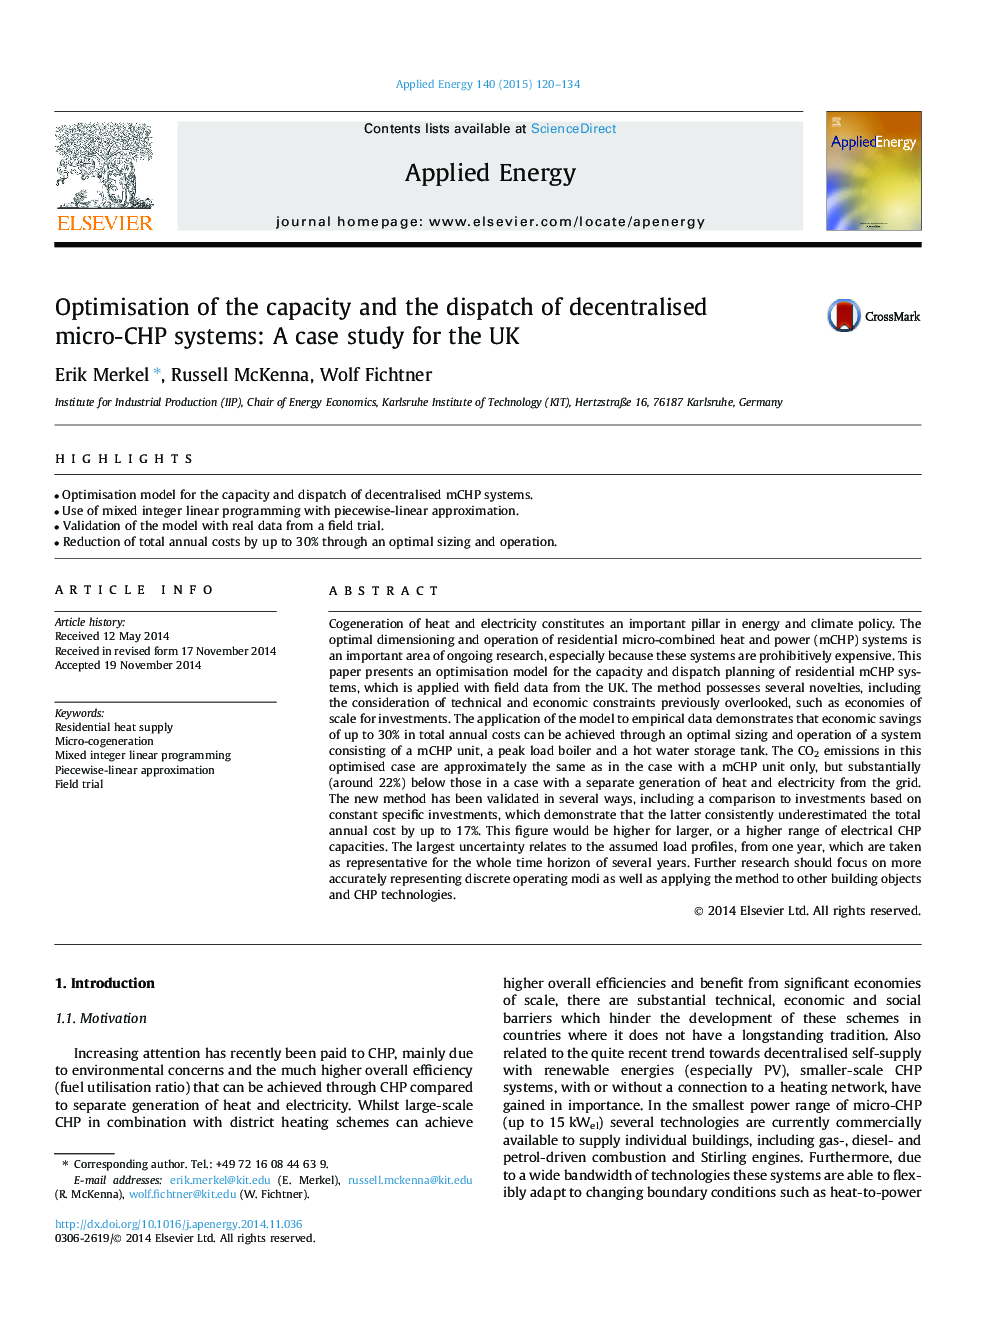 Optimisation of the capacity and the dispatch of decentralised micro-CHP systems: A case study for the UK